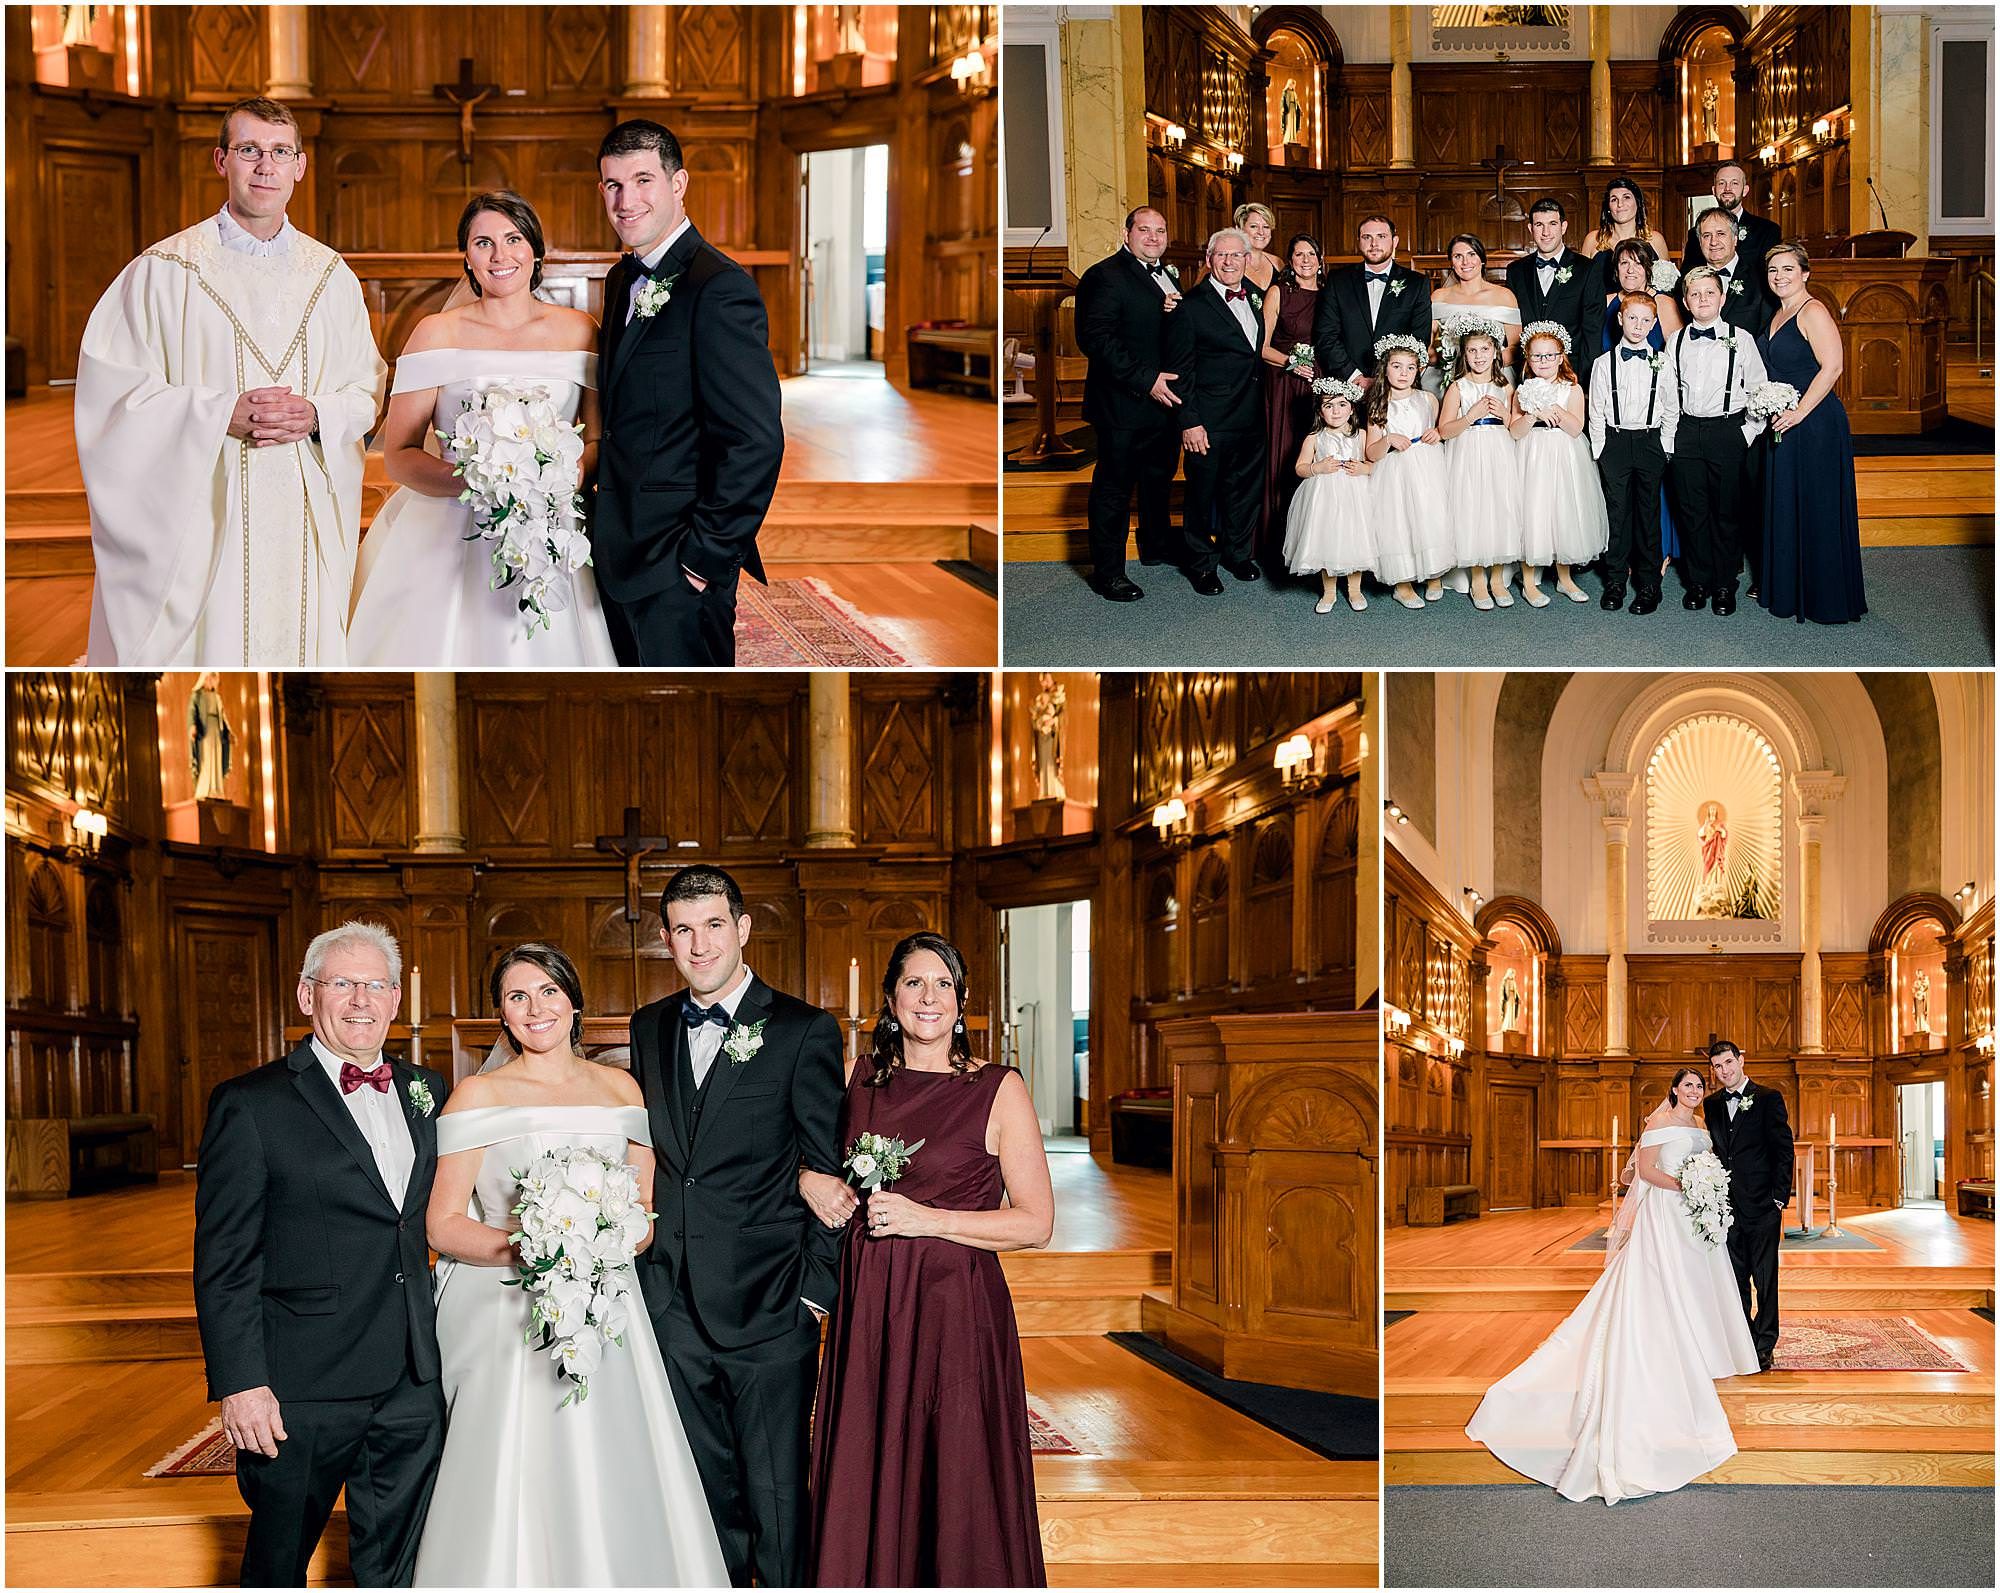 family portraits at wedding alter